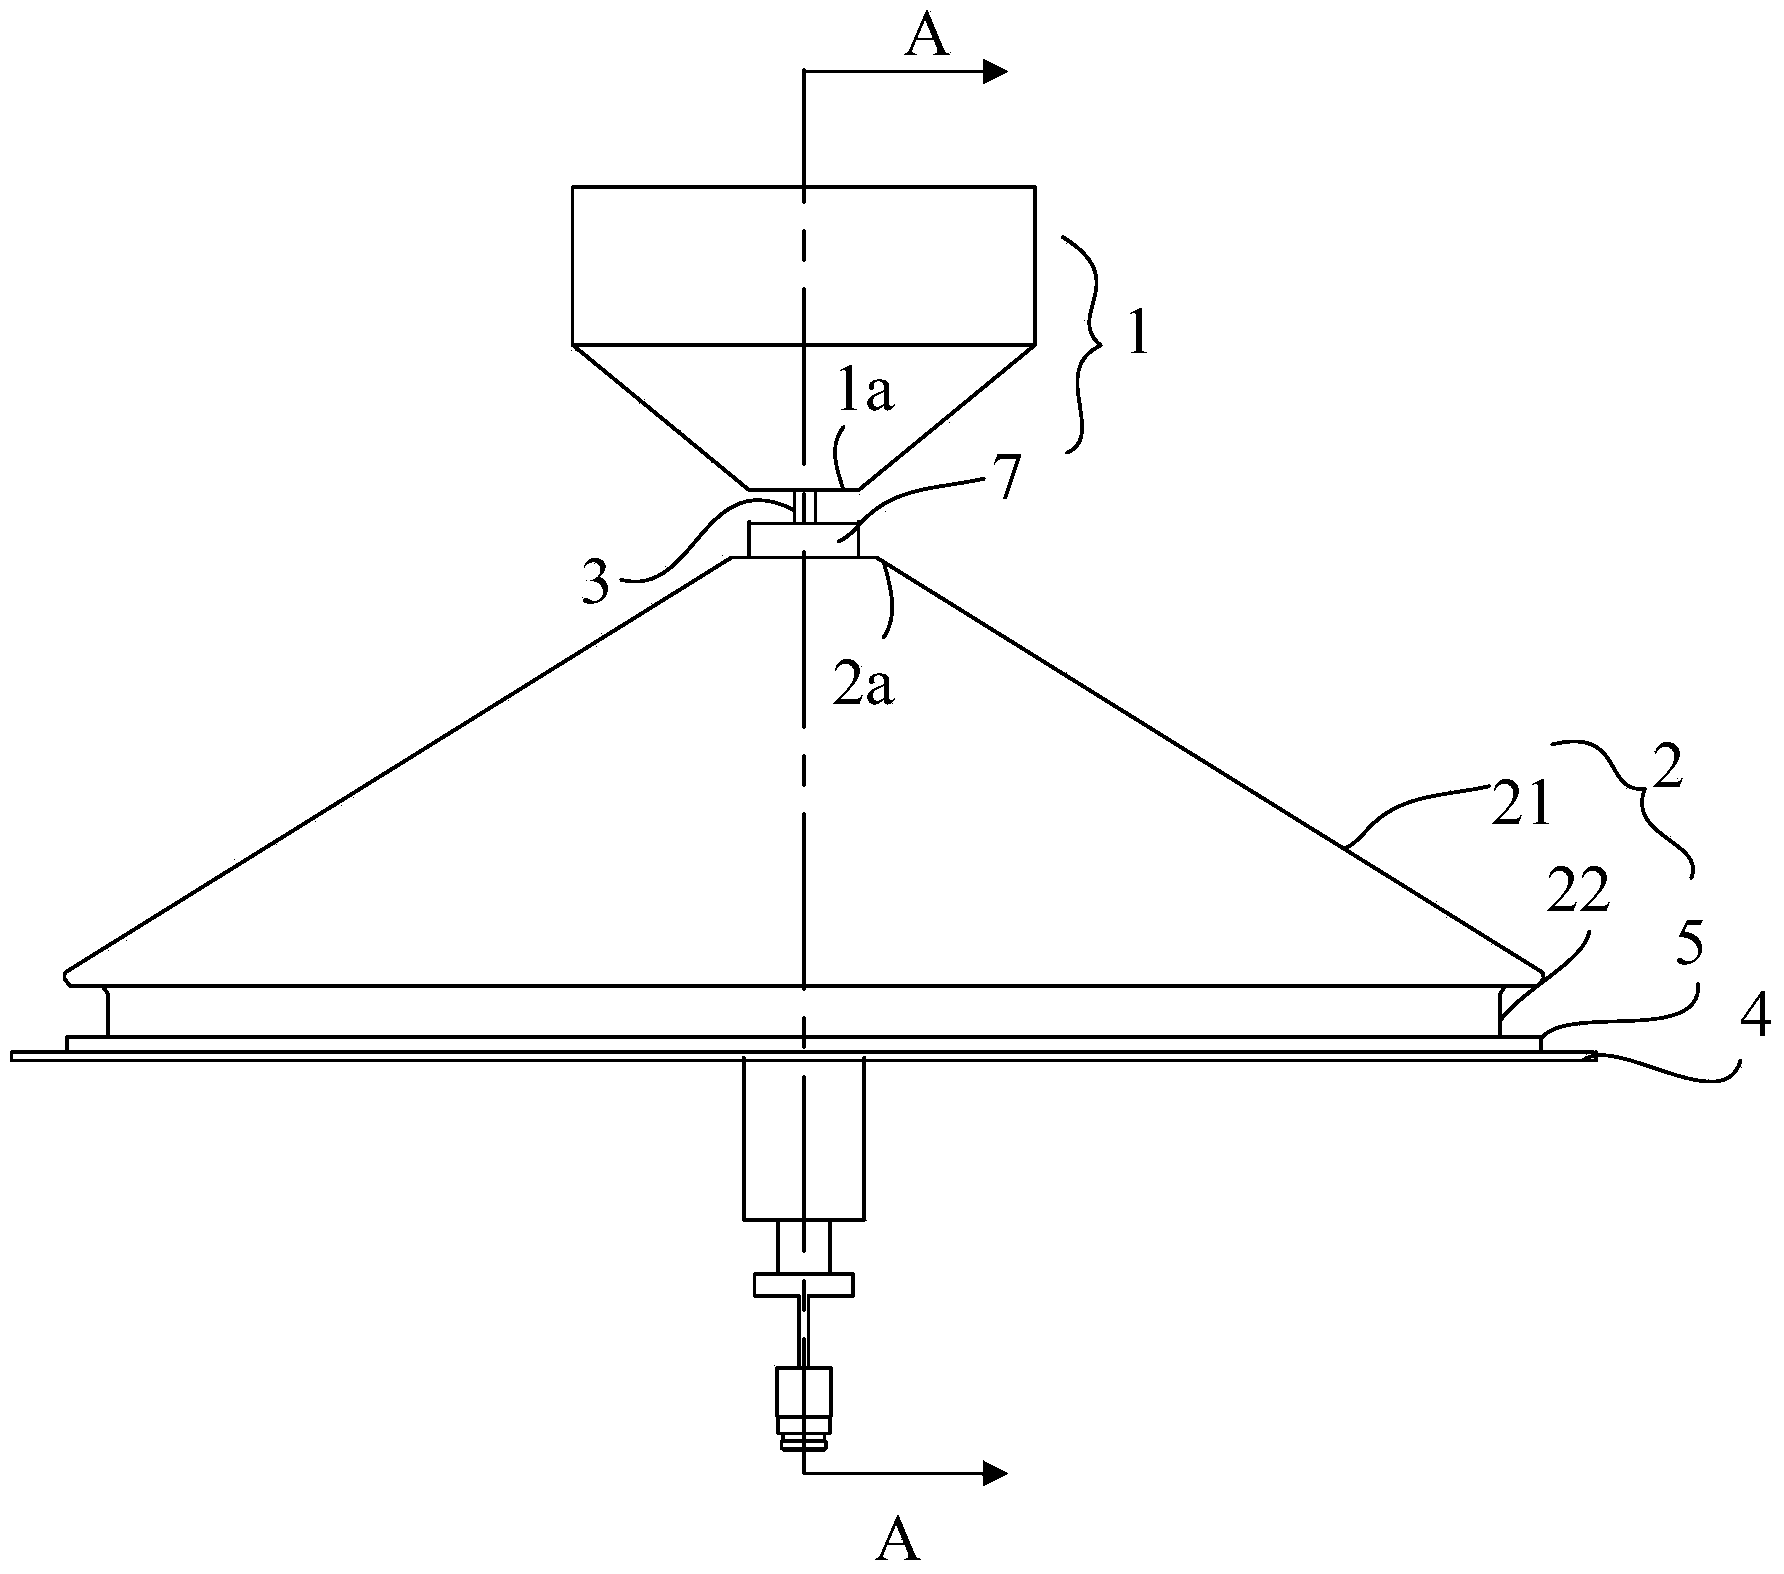 Omni-directional ceiling antenna